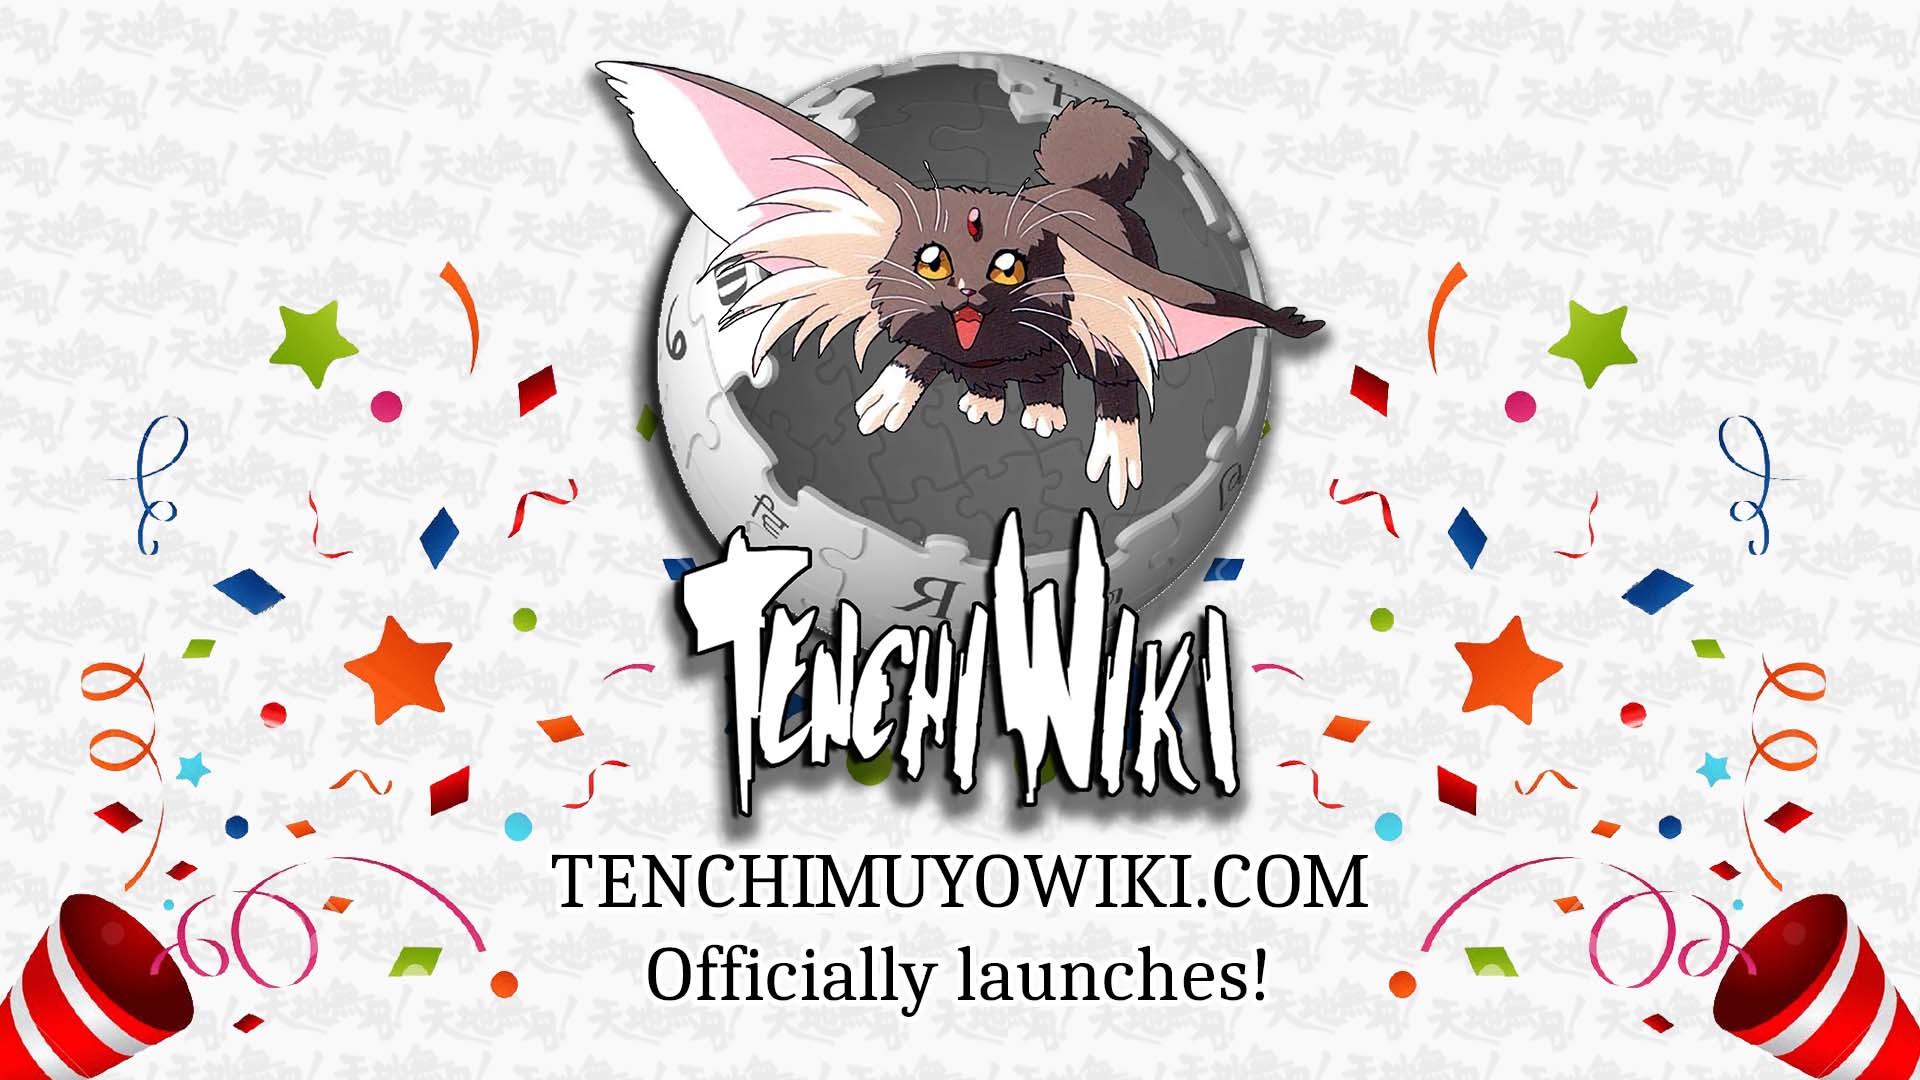 Tenchimuyowiki.com Officially Launches!